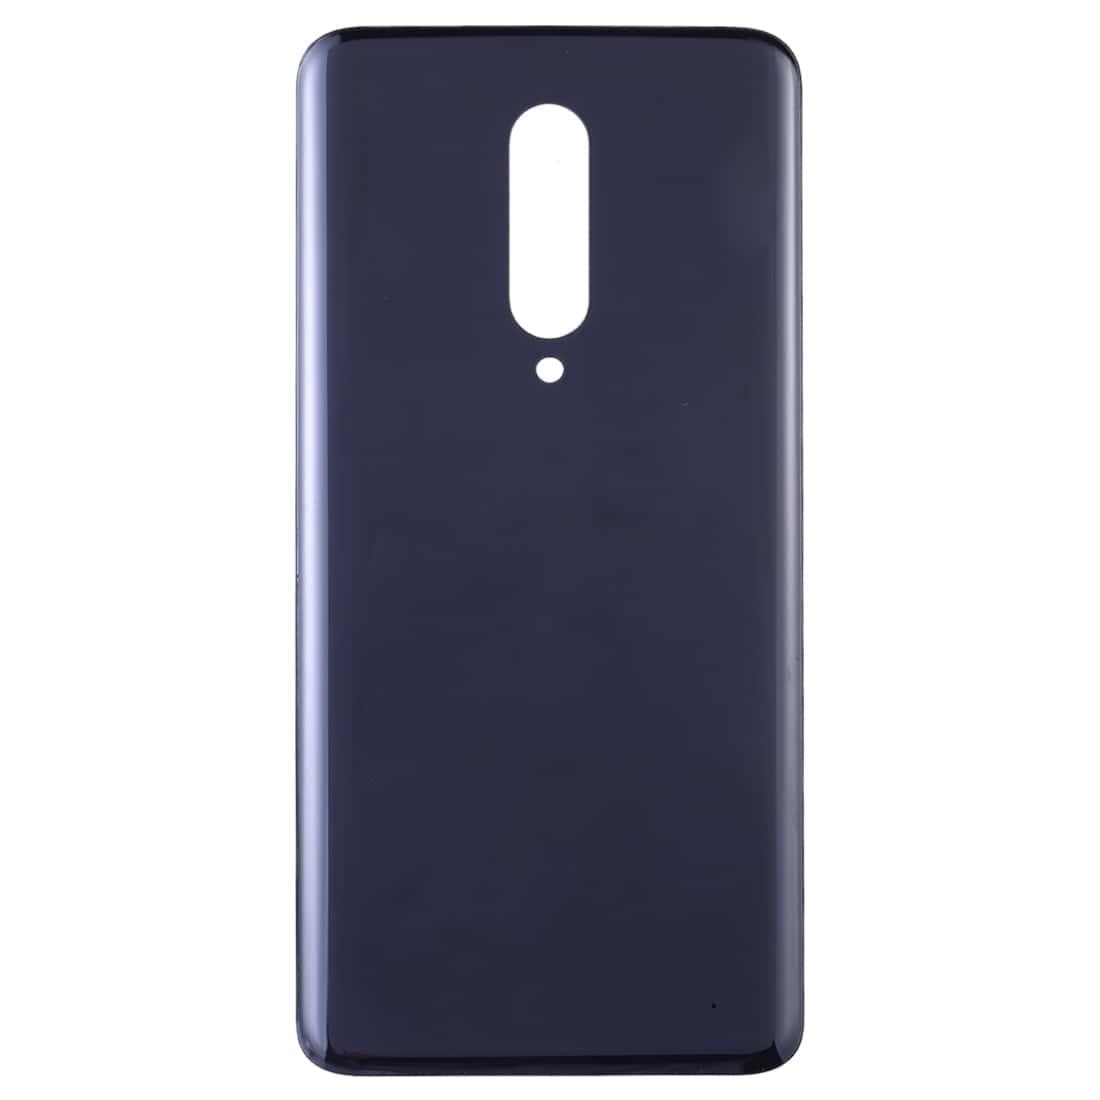 Back Glass Panel for  Oneplus 7 Pro Grey